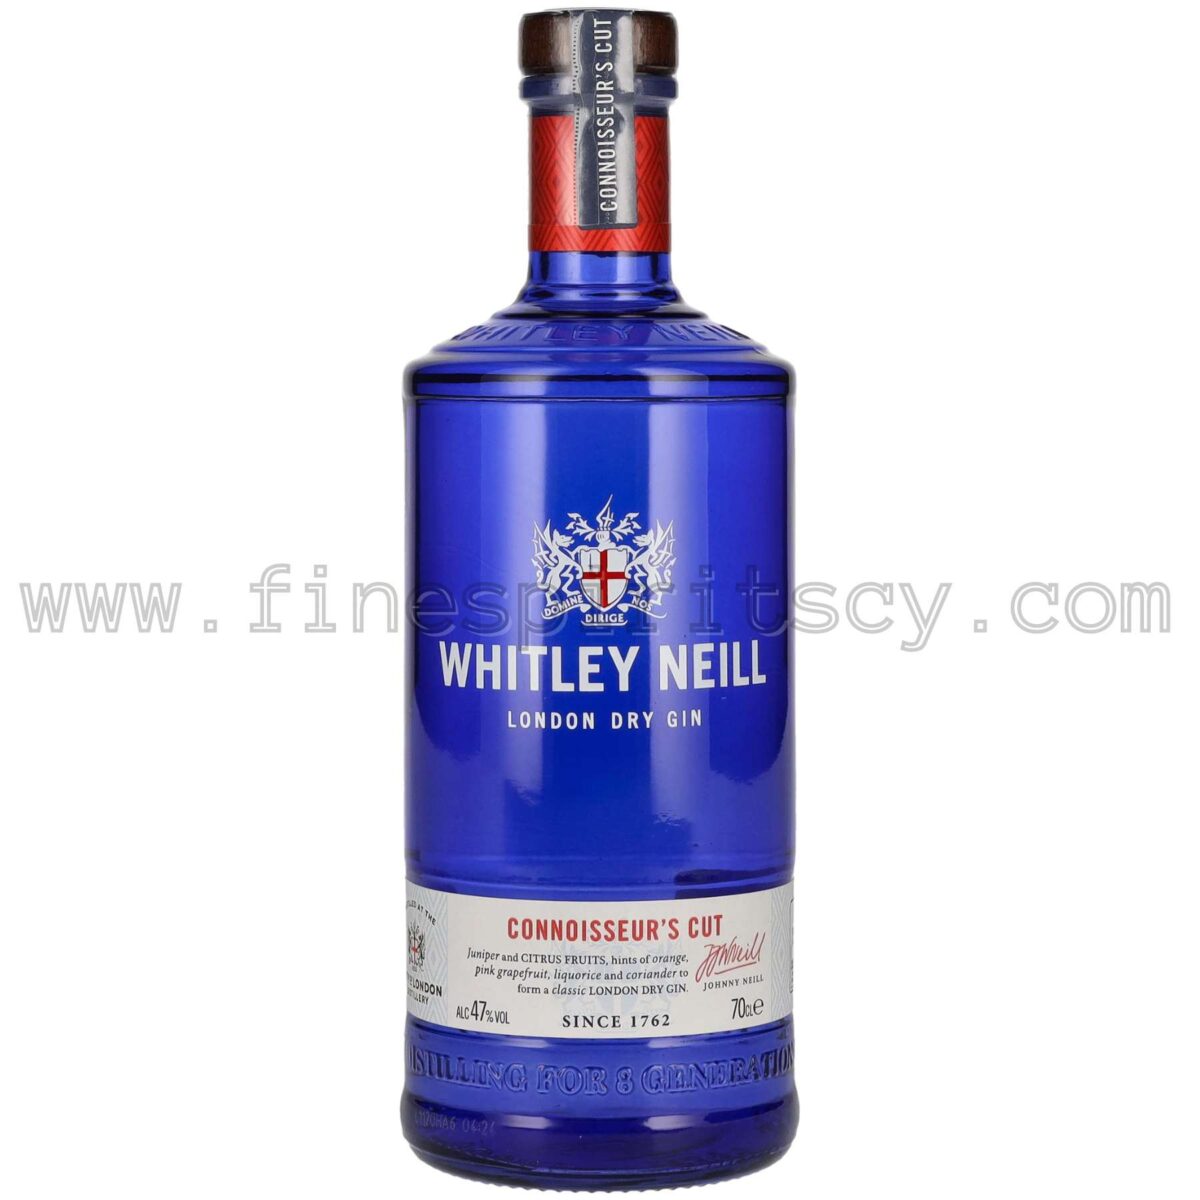 Whitley Neill Connoisseurs Cut Cyprus Price Gin 700ml 70cl 0.7L 47% ABV